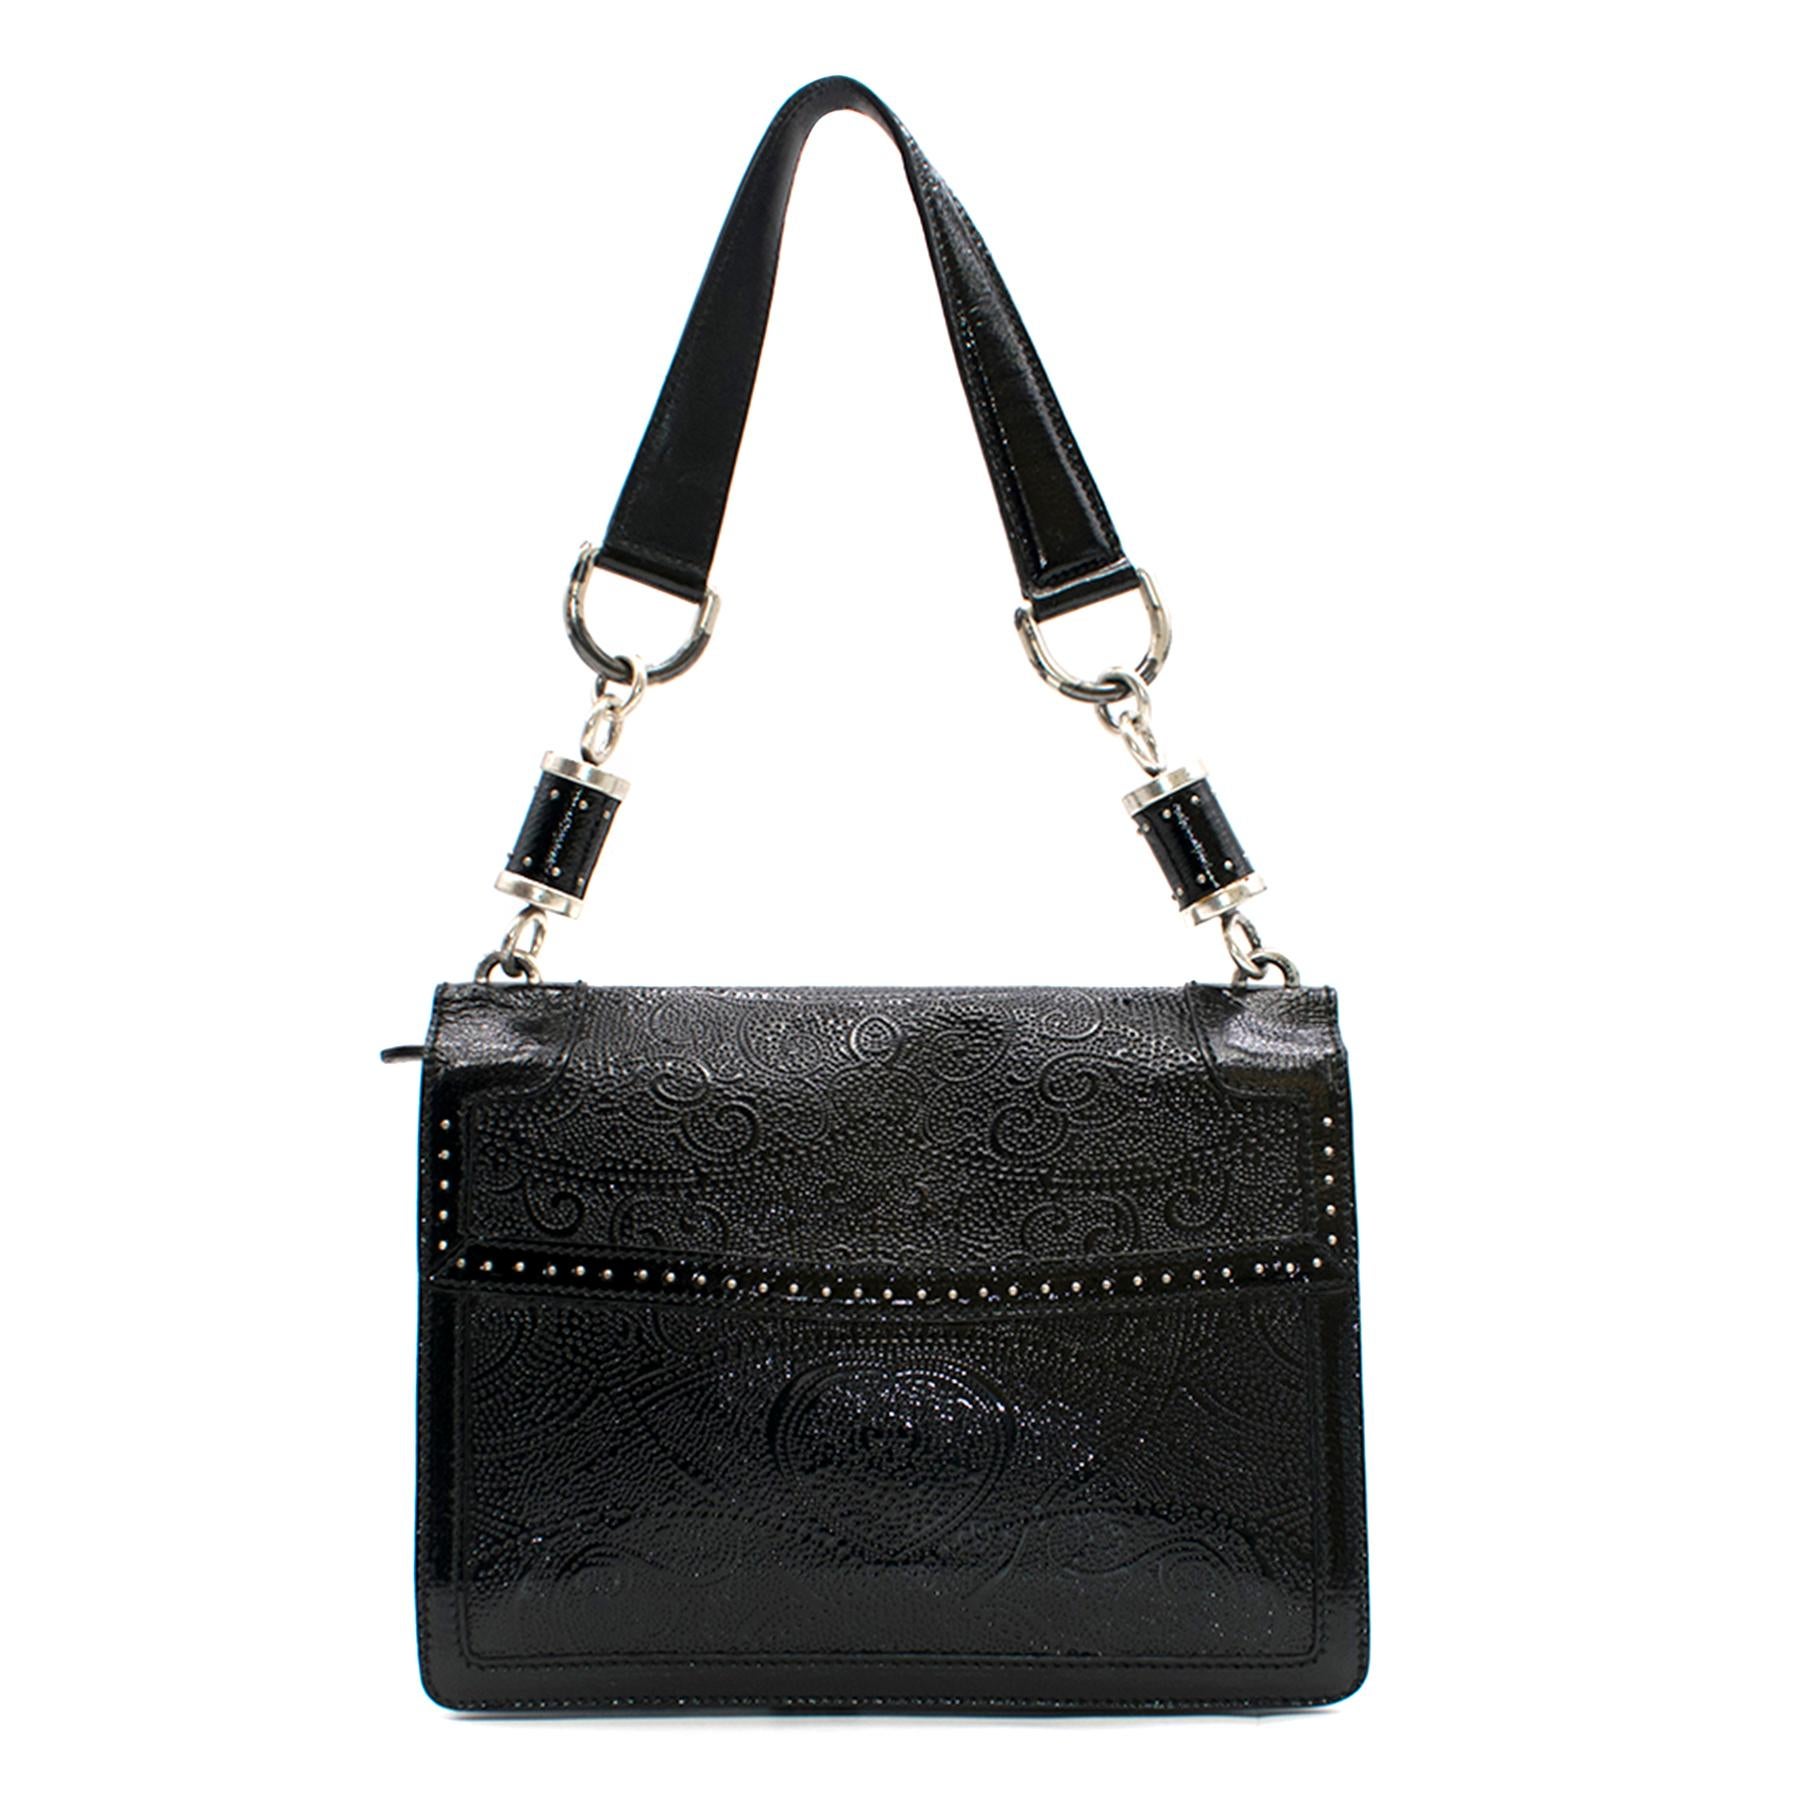 Alexander McQueen Black Embossed-Leather Shoulder Bag

- An original Alexander McQueen item 
- Silver toned hardware 
- Top leather handle 
- Embossed covered leather
- Front flap, chain & pin-clasp closure 
- Stud-trimmed edges
- Large interior zip